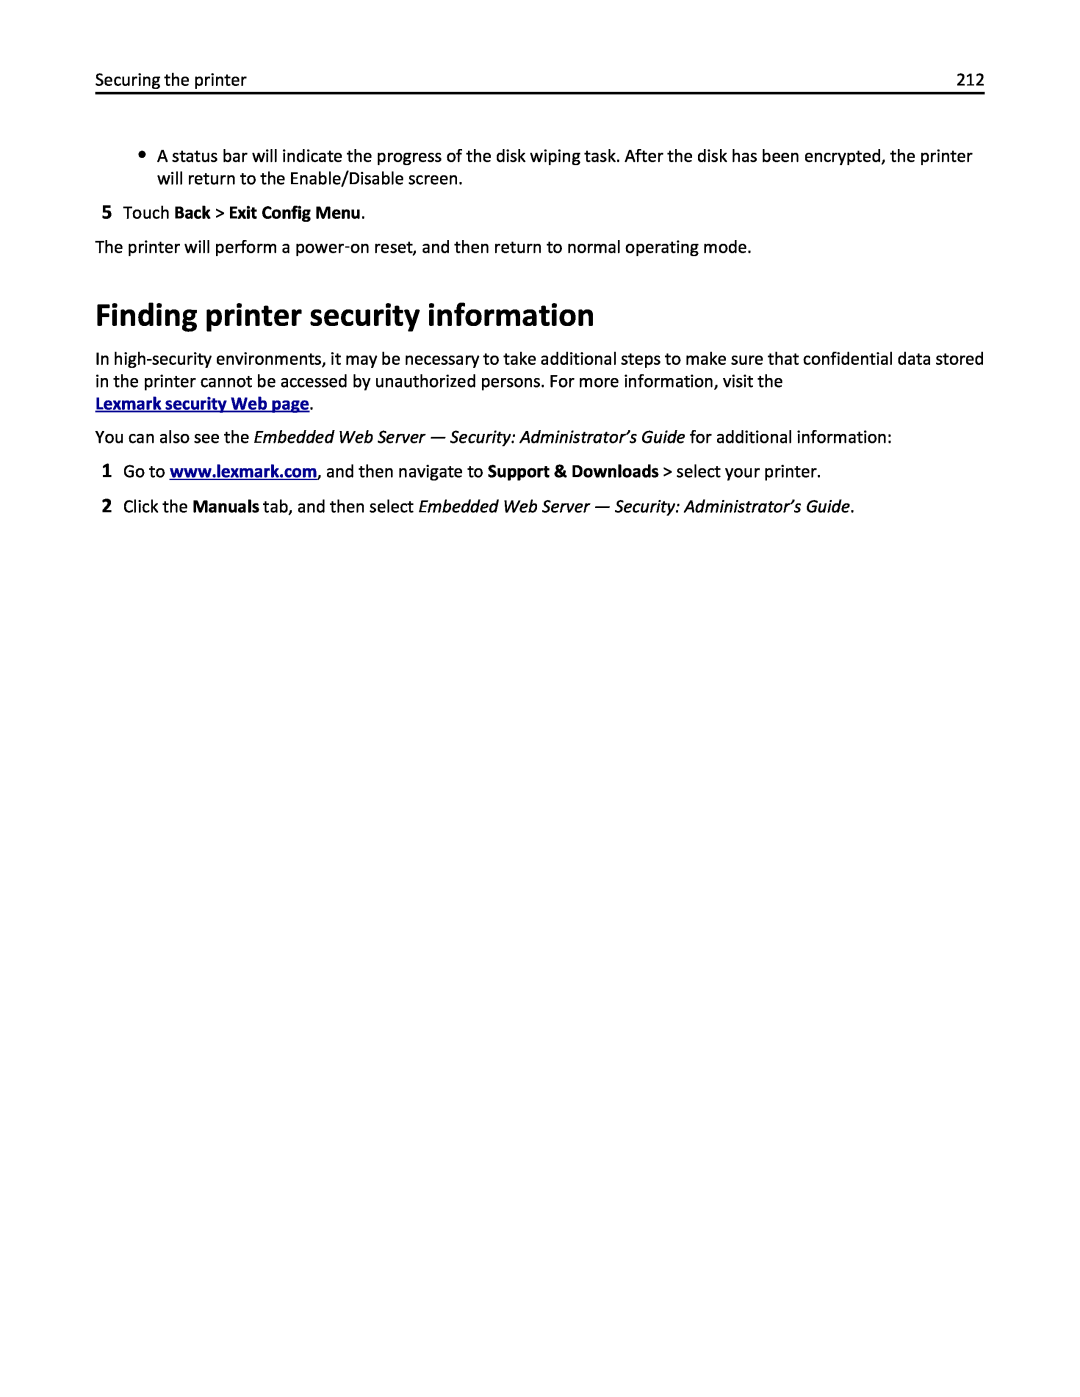 Lexmark 670, 470, 35S5701, 675 Finding printer security information, Touch Back Exit Config Menu, Lexmark security Web page 